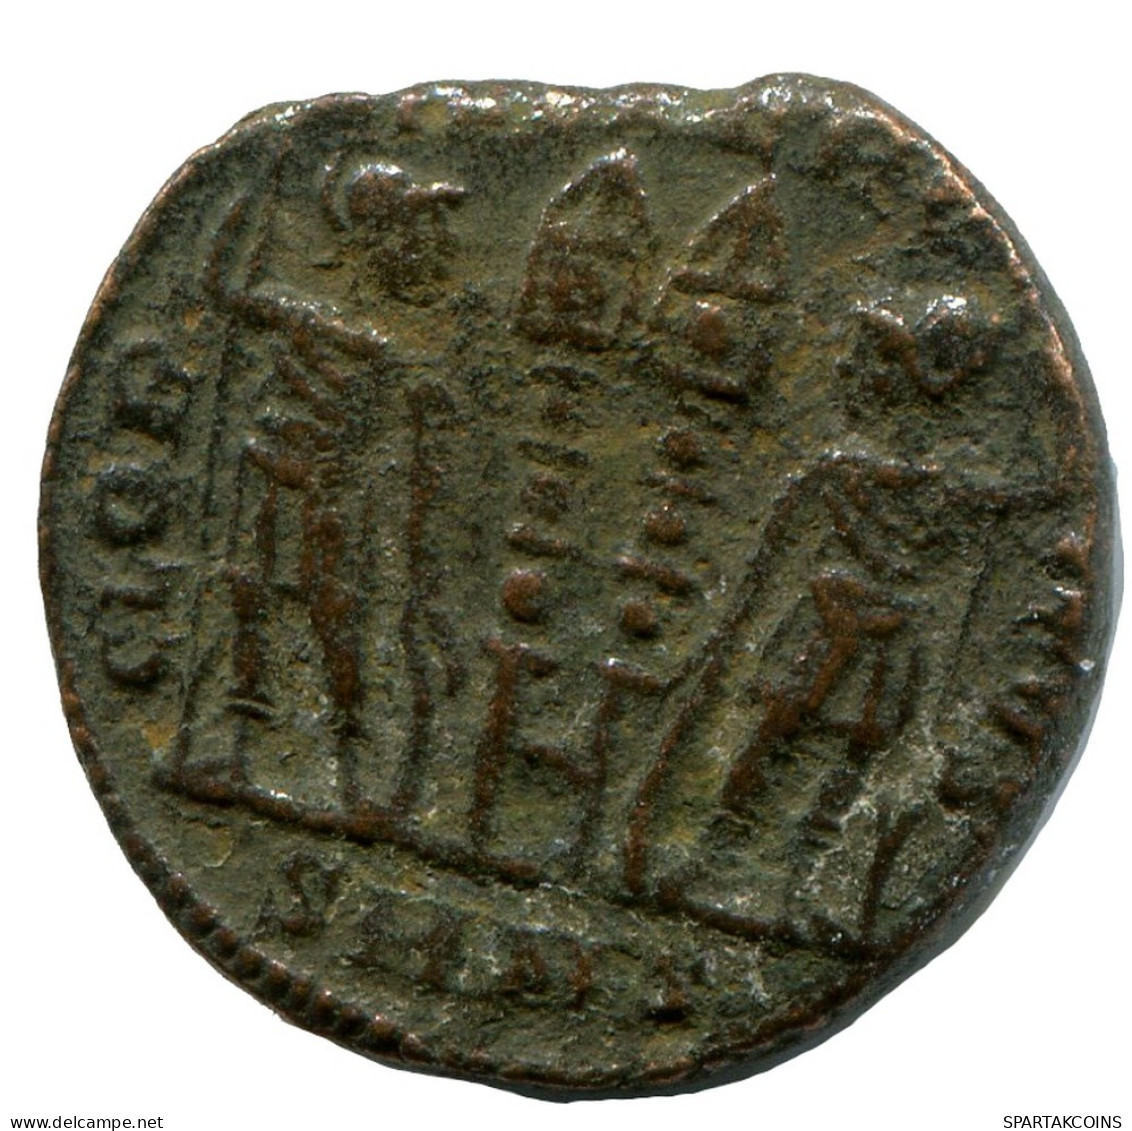 CONSTANTINE I MINTED IN NICOMEDIA FOUND IN IHNASYAH HOARD EGYPT #ANC10835.14.D.A - The Christian Empire (307 AD To 363 AD)